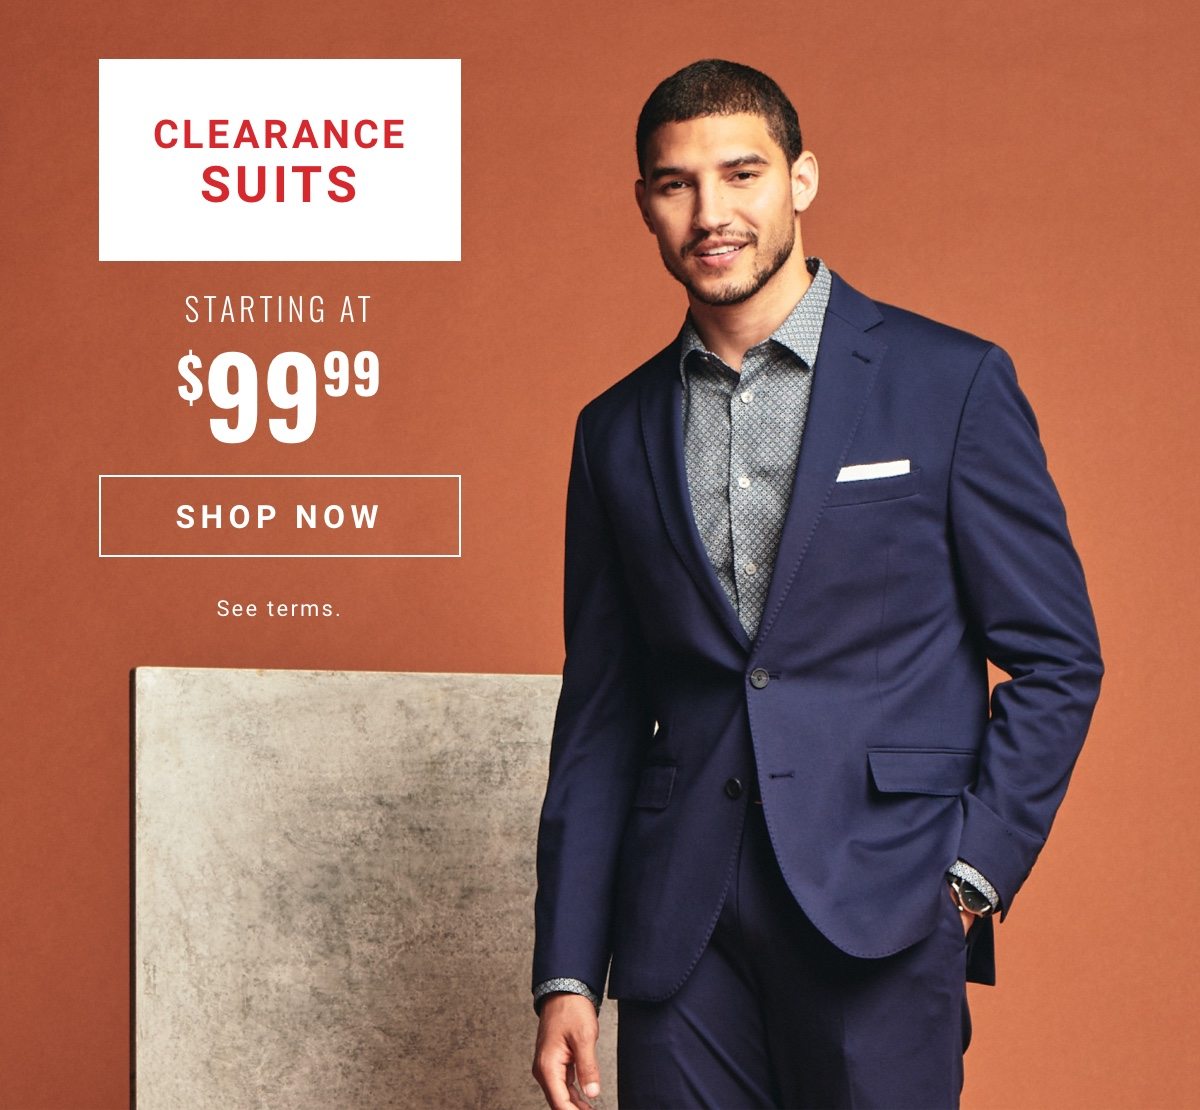 Clearance Suits Starting at 99.99